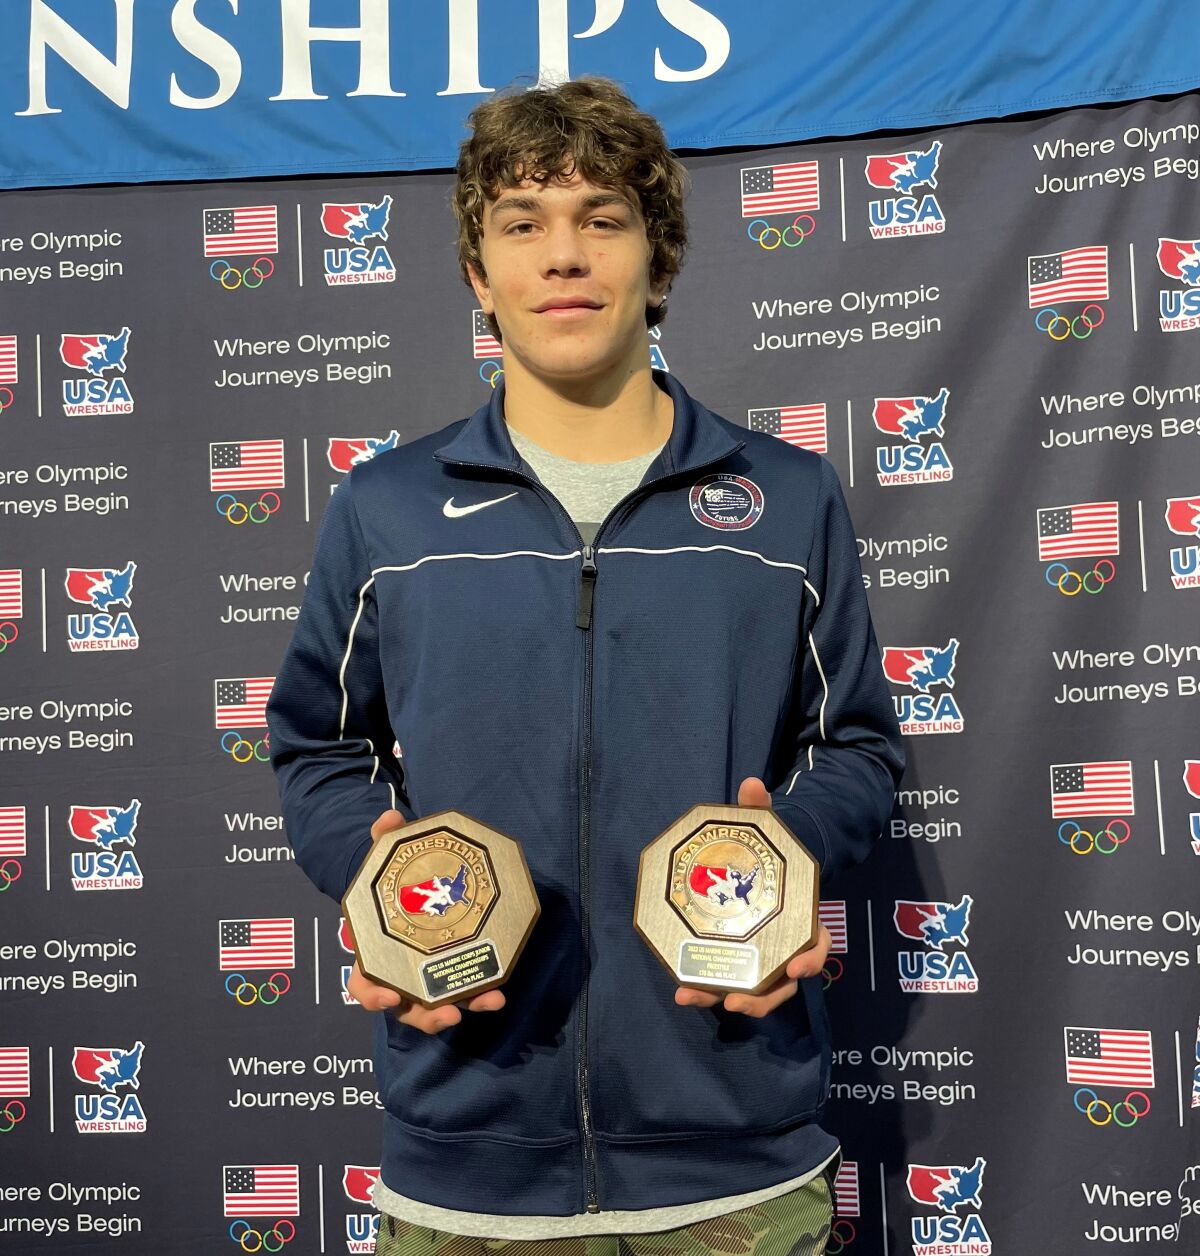 Poway High senior Luke Condon was fourth at 18U freestyle at the USA Wrestling Junior and 16U National Championships